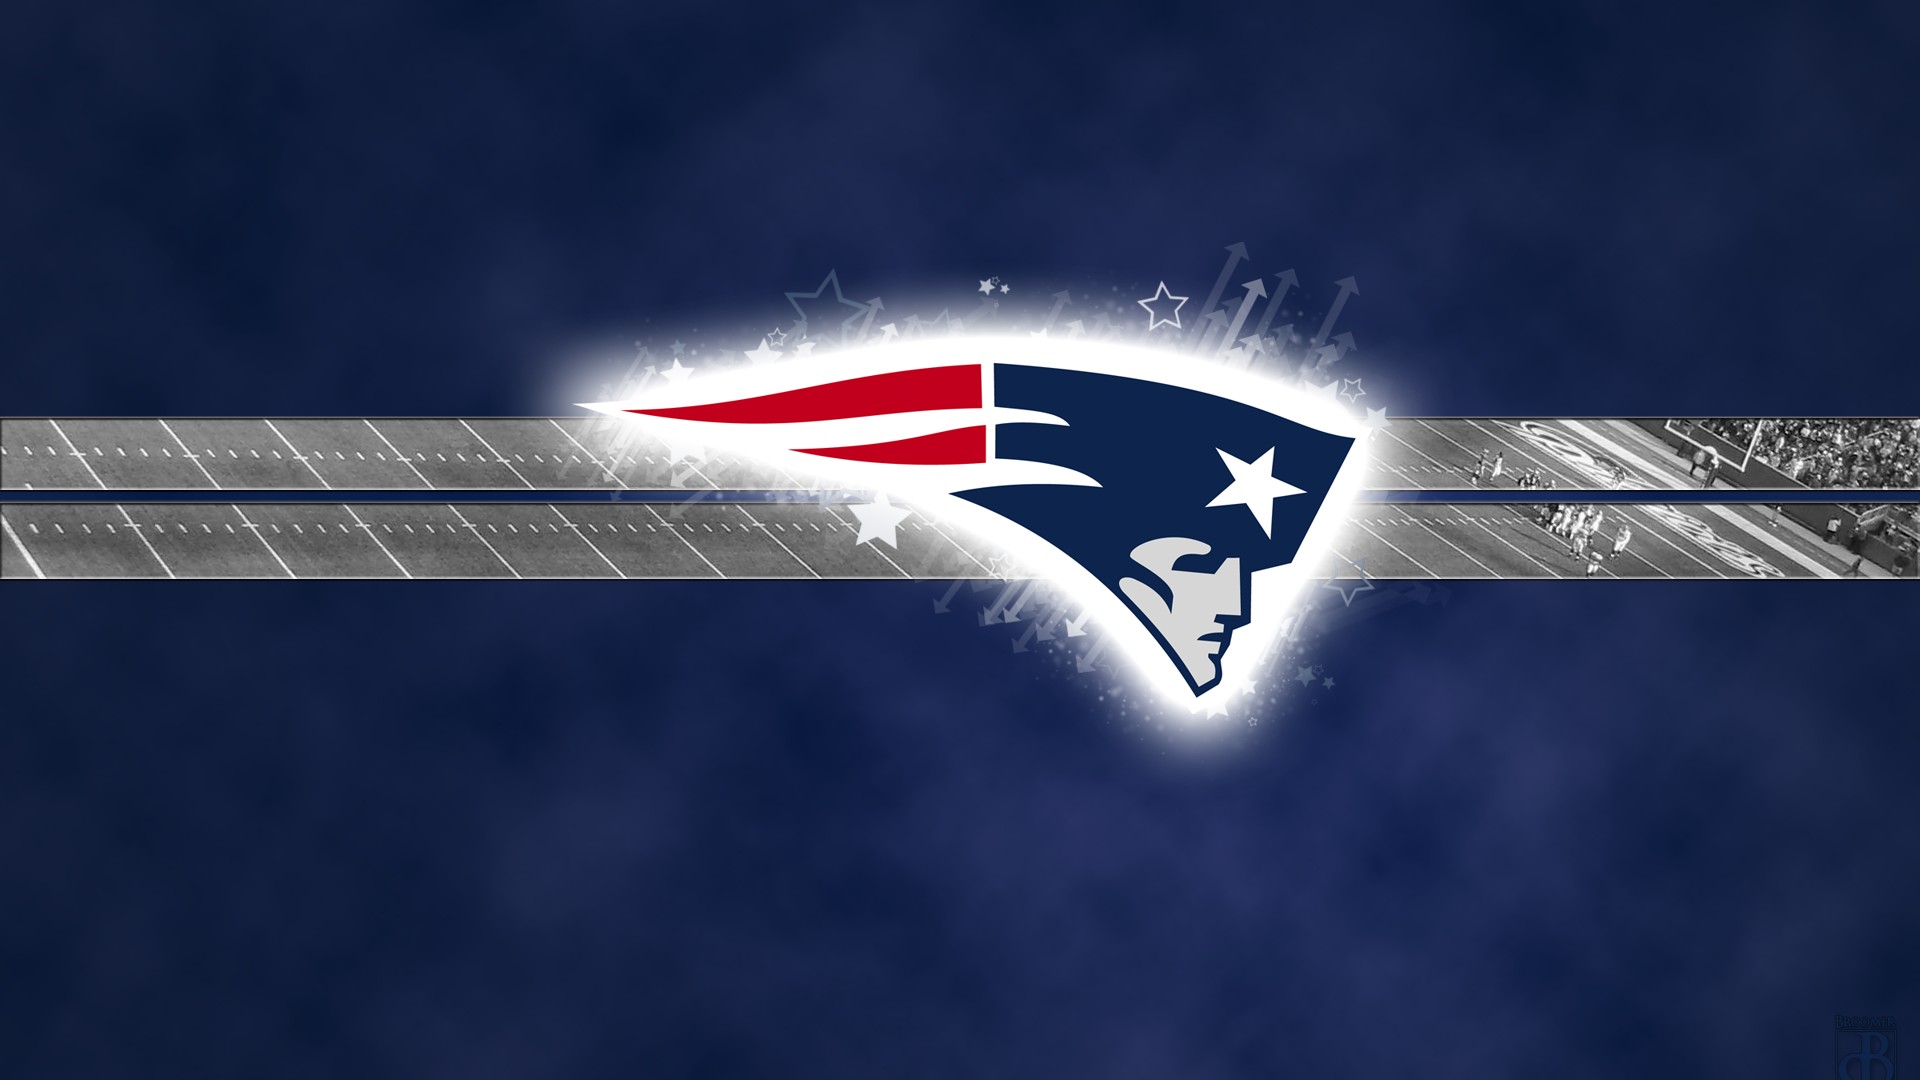 HD NE Patriots Backgrounds With Resolution 1920X1080 pixel. You can make this wallpaper for your Mac or Windows Desktop Background, iPhone, Android or Tablet and another Smartphone device for free